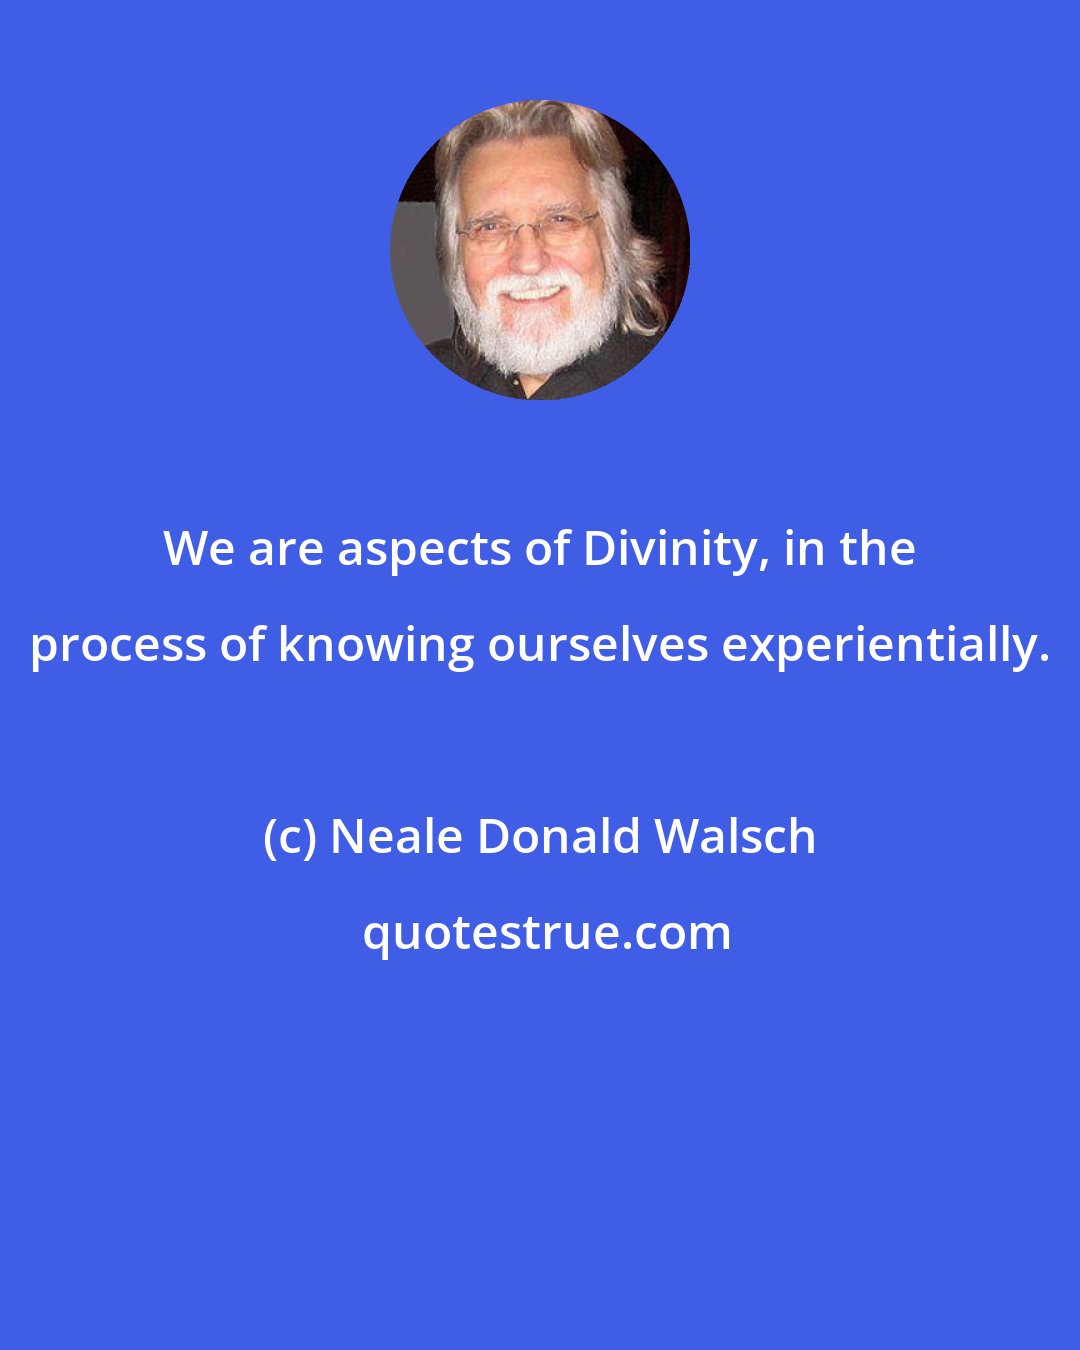 Neale Donald Walsch: We are aspects of Divinity, in the process of knowing ourselves experientially.